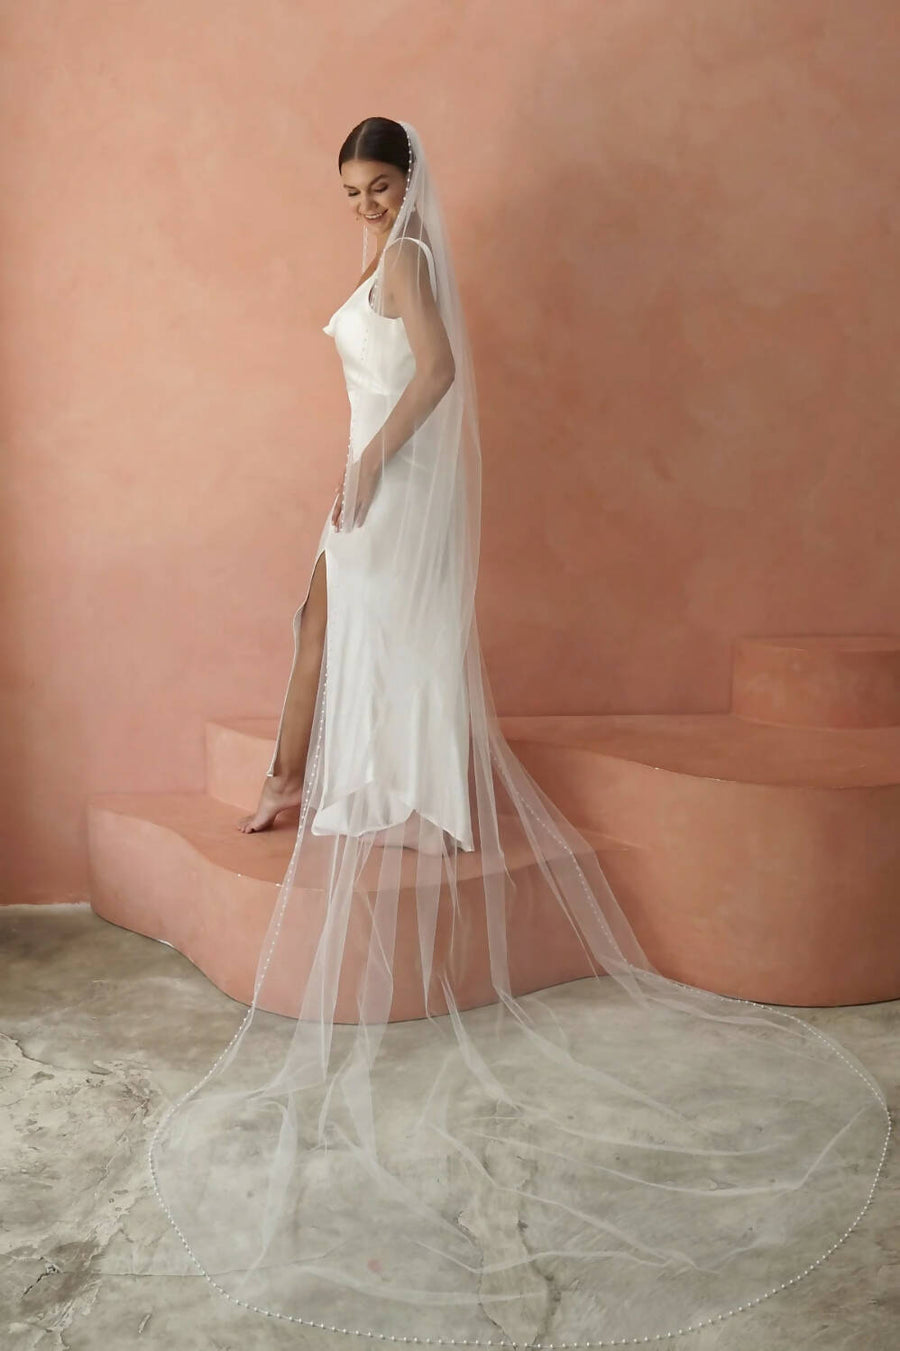 ODETTE I - One Tier Pearl Edge Veil